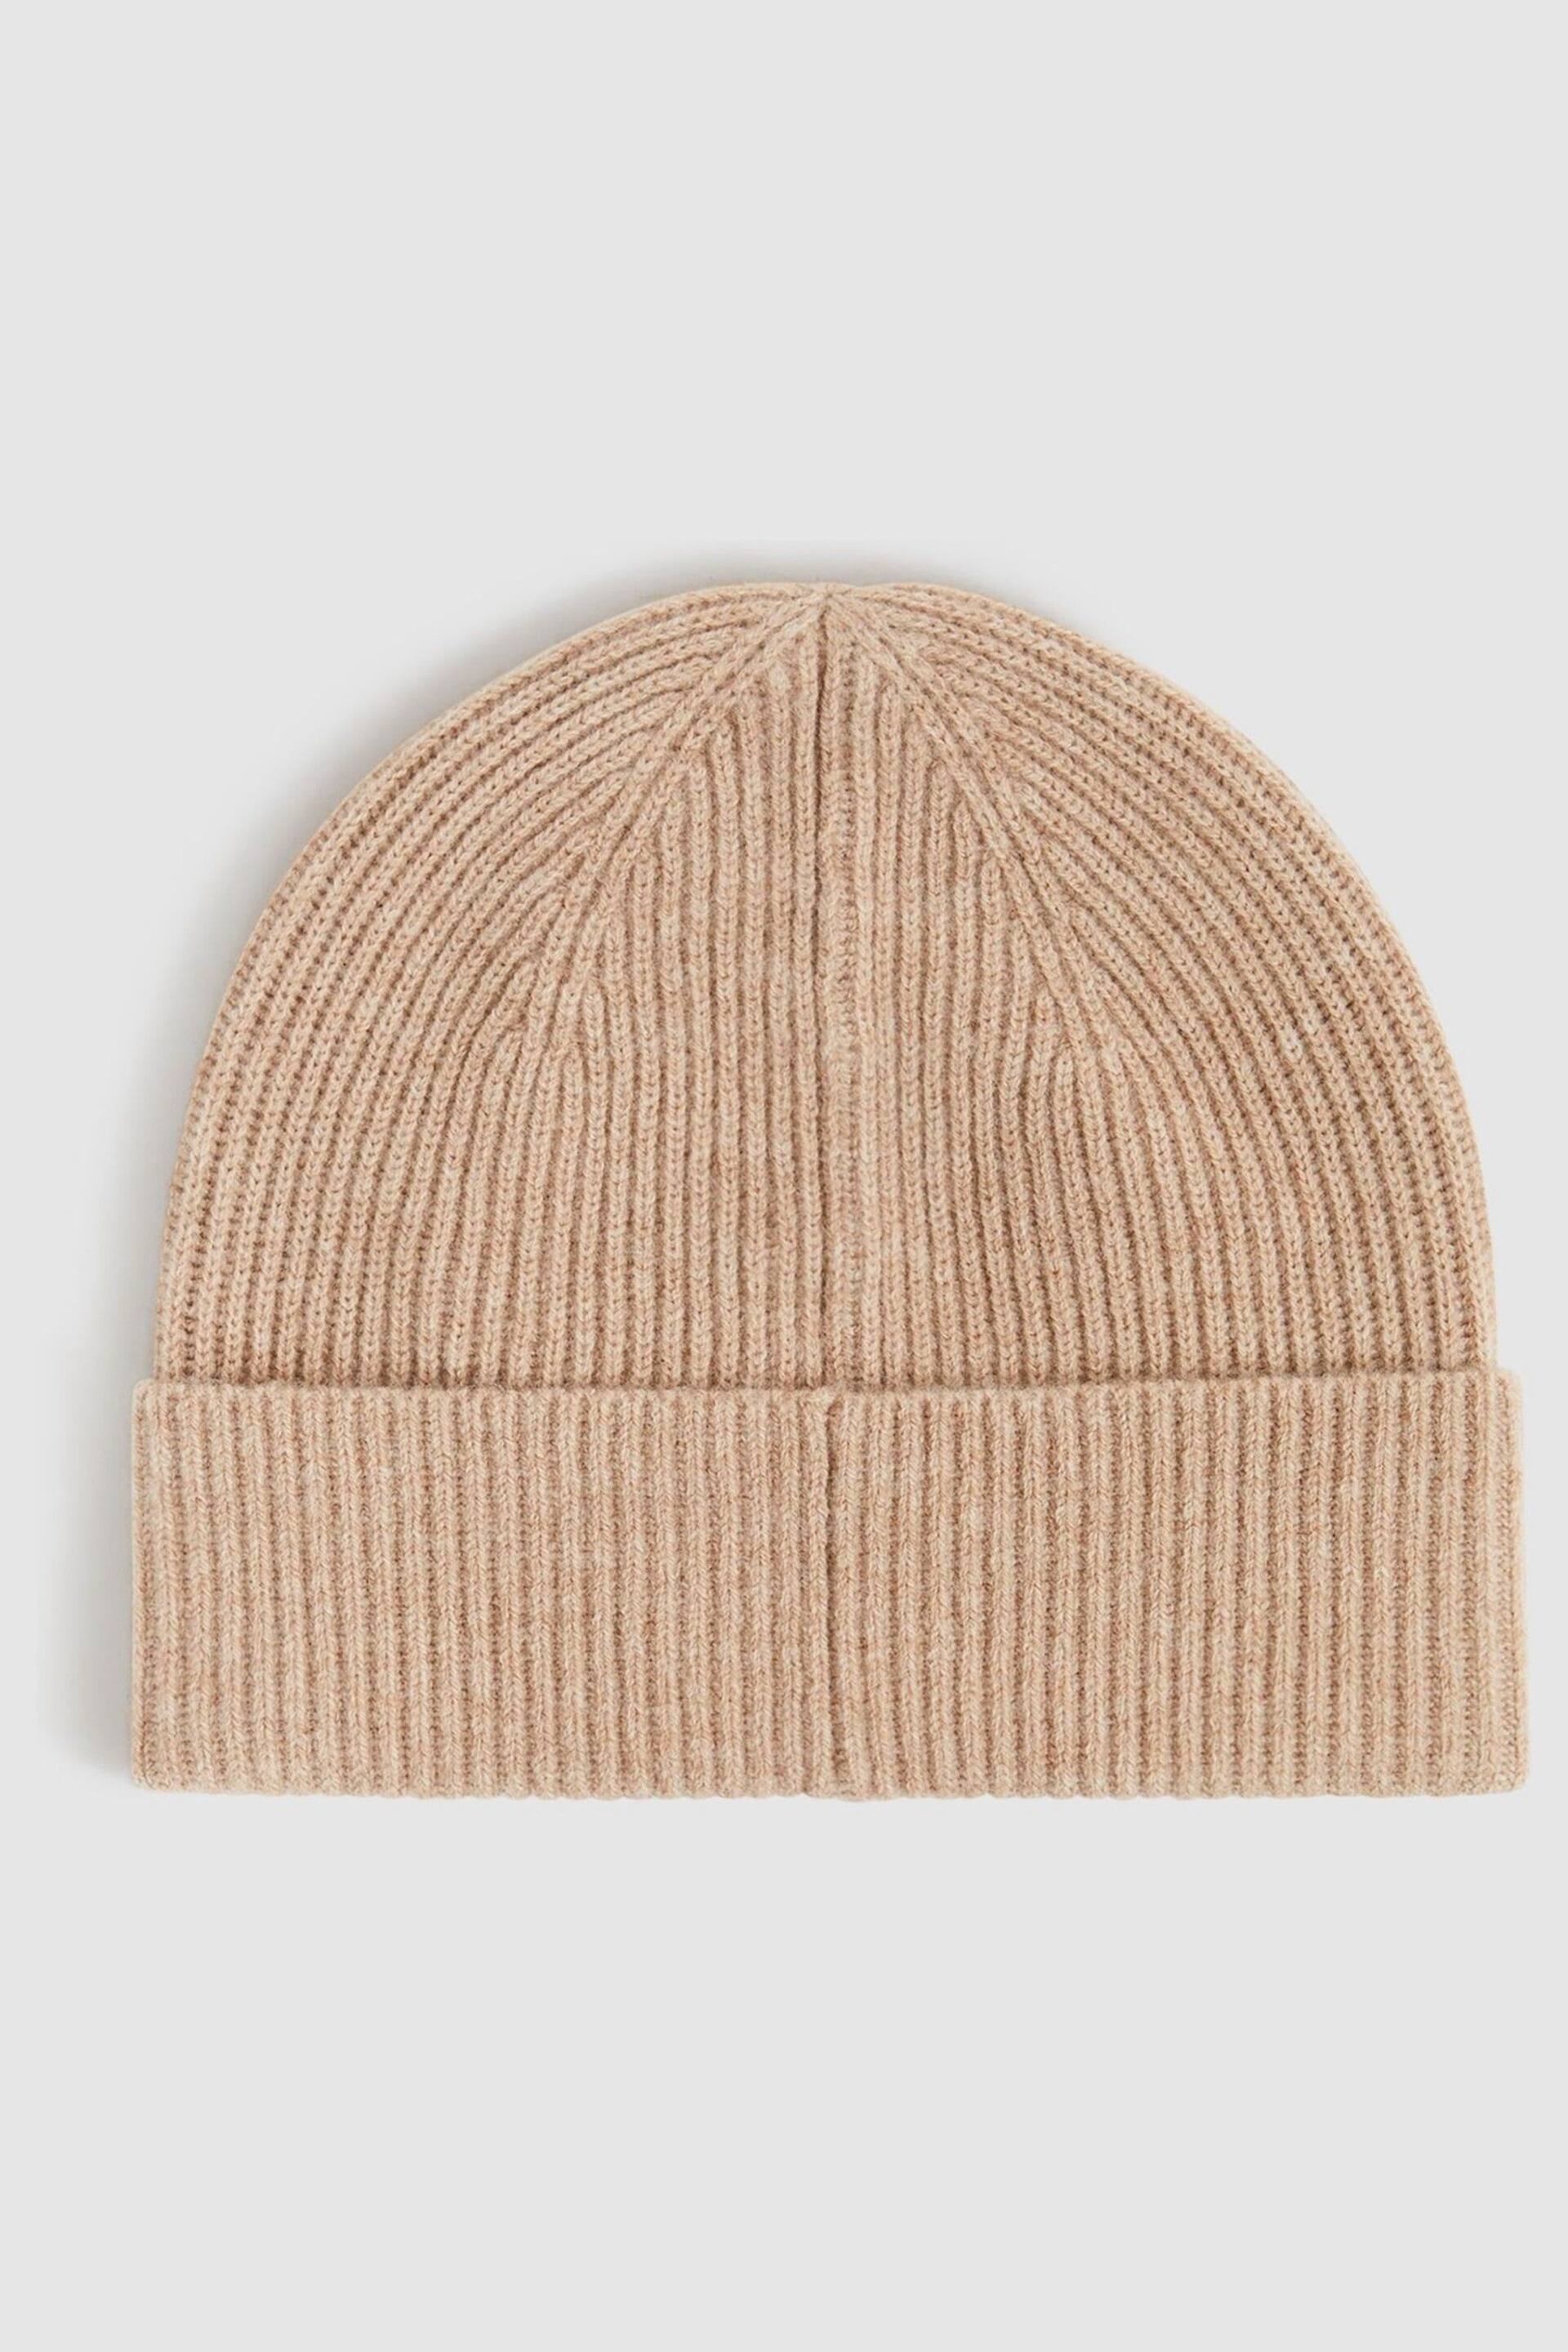 Reiss Camel Chaise Merino Wool Ribbed Beanie Hat - Image 4 of 5